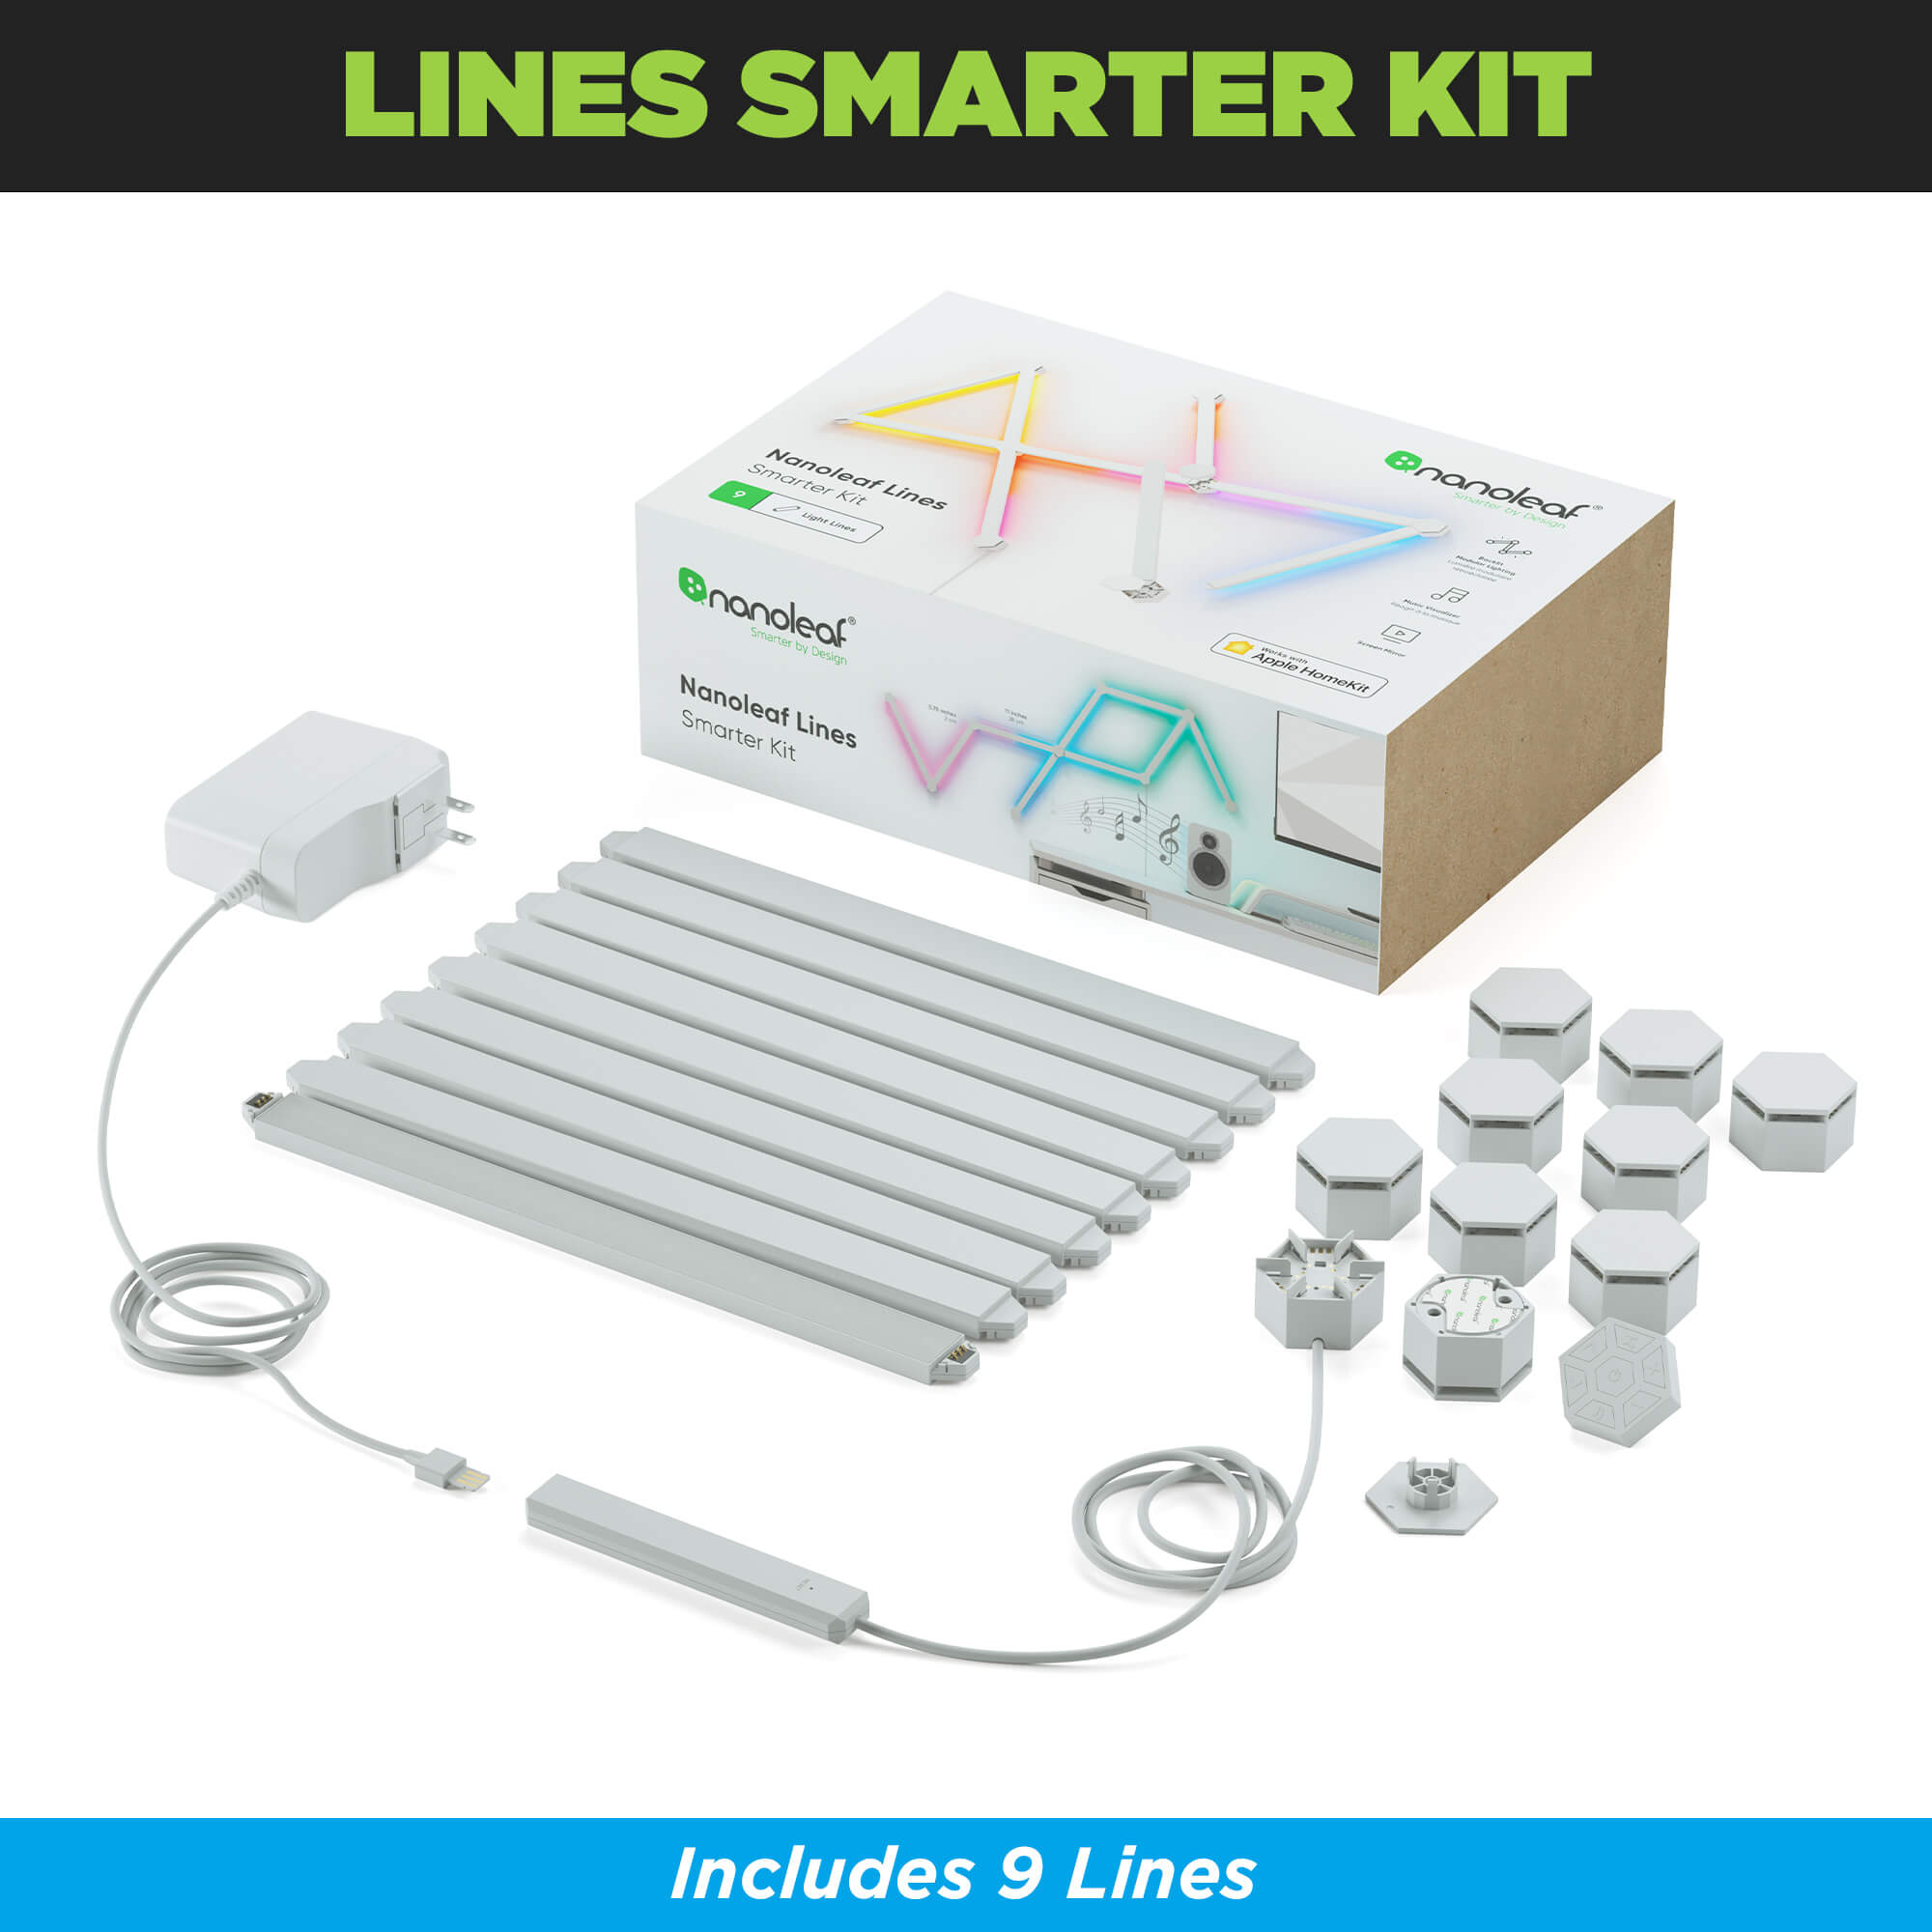 Lines 60 Degrees Smarter Kit from Nanoleaf comes with 9 lines.